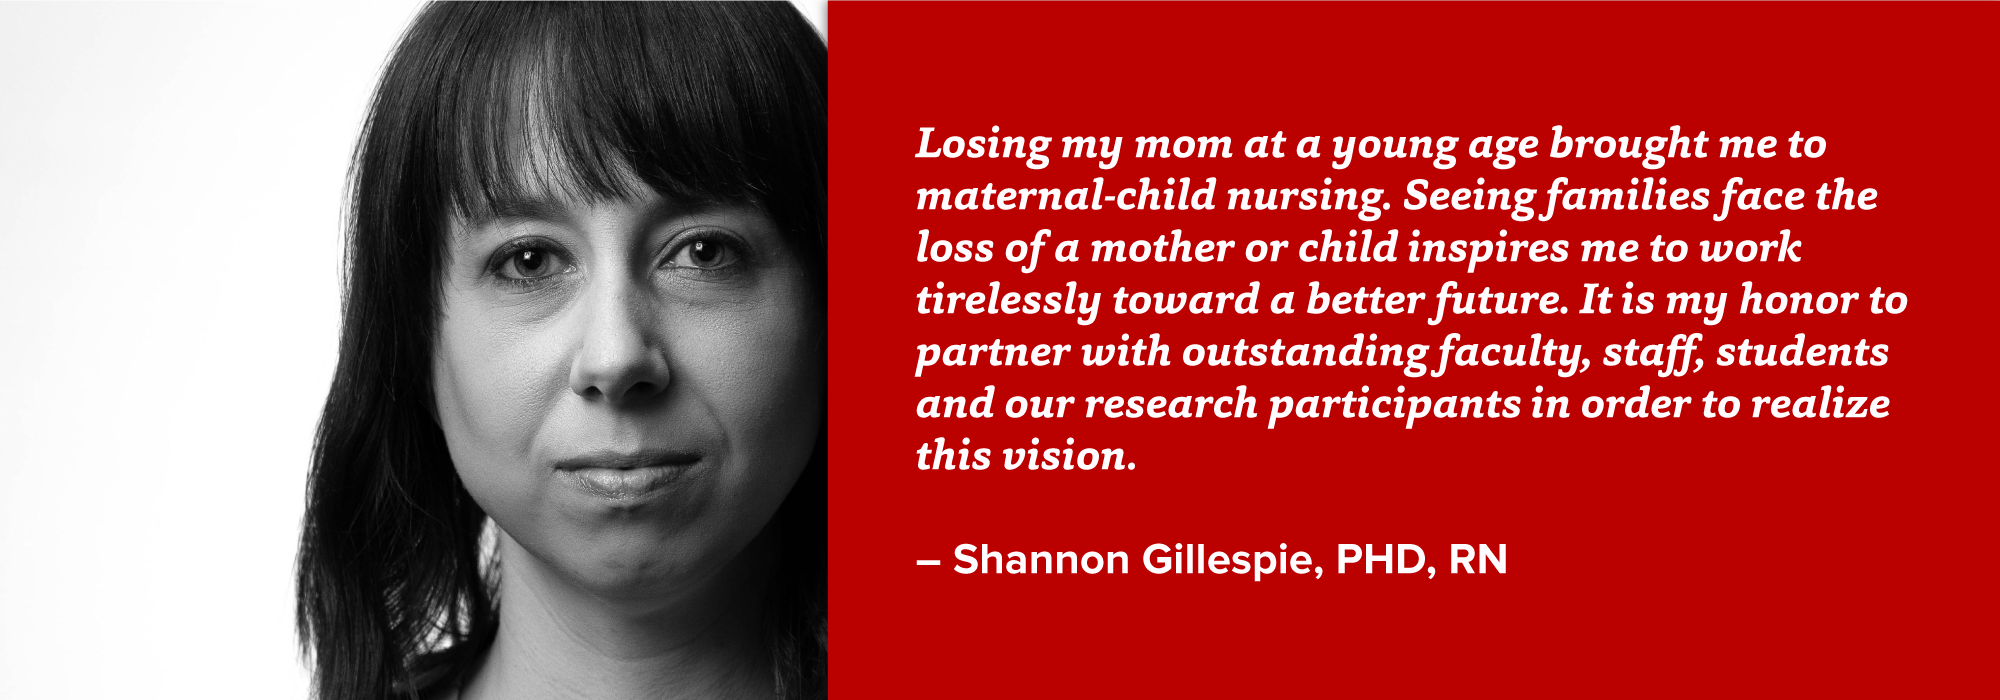 portrait of Shannon Gillespie with quote: Losing my mom at a young age brought me to maternal-child nursing. Seeing families face the loss of a mother or child inspires me to work tirelessly toward a better future. It is my honor to partner with outstanding faculty, staff, students and our research participants in order to realize this vision.  – Shannon Gillespie, PHD, RN